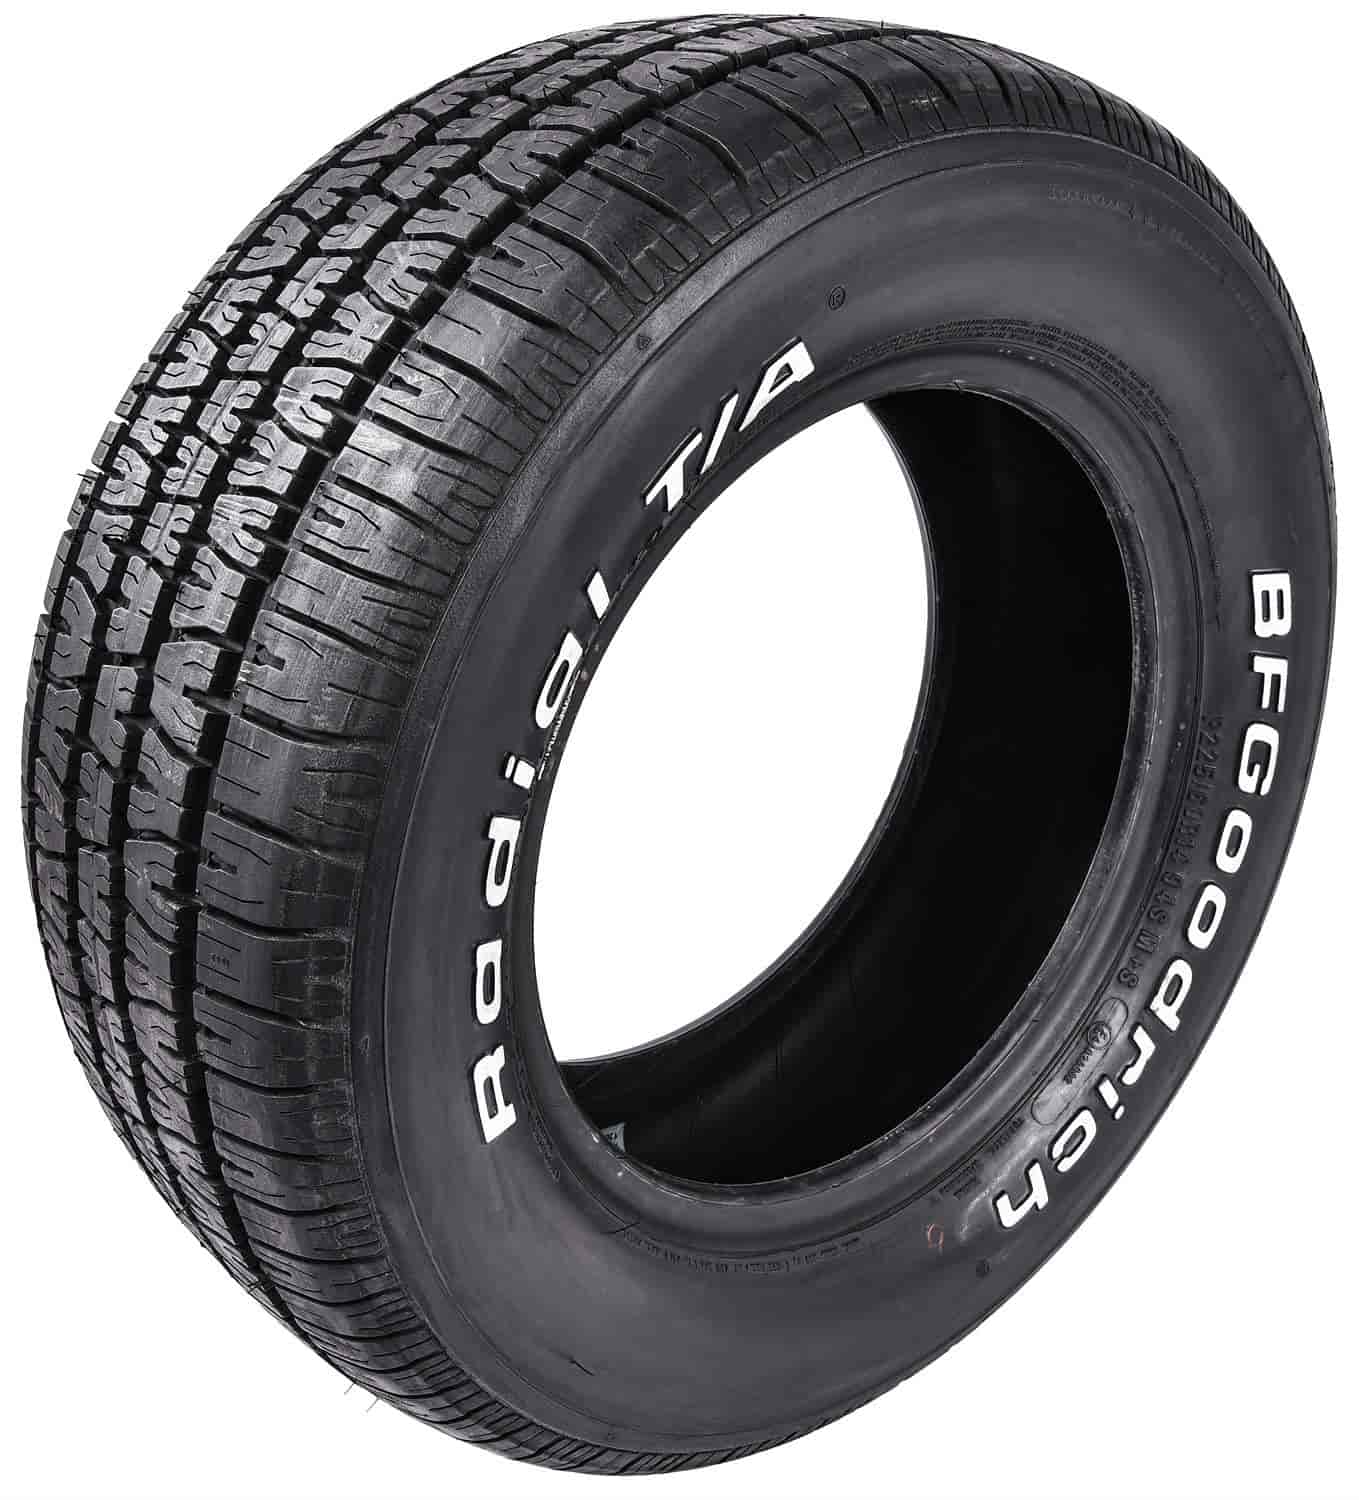 Radial T/A Tire P225/60R14